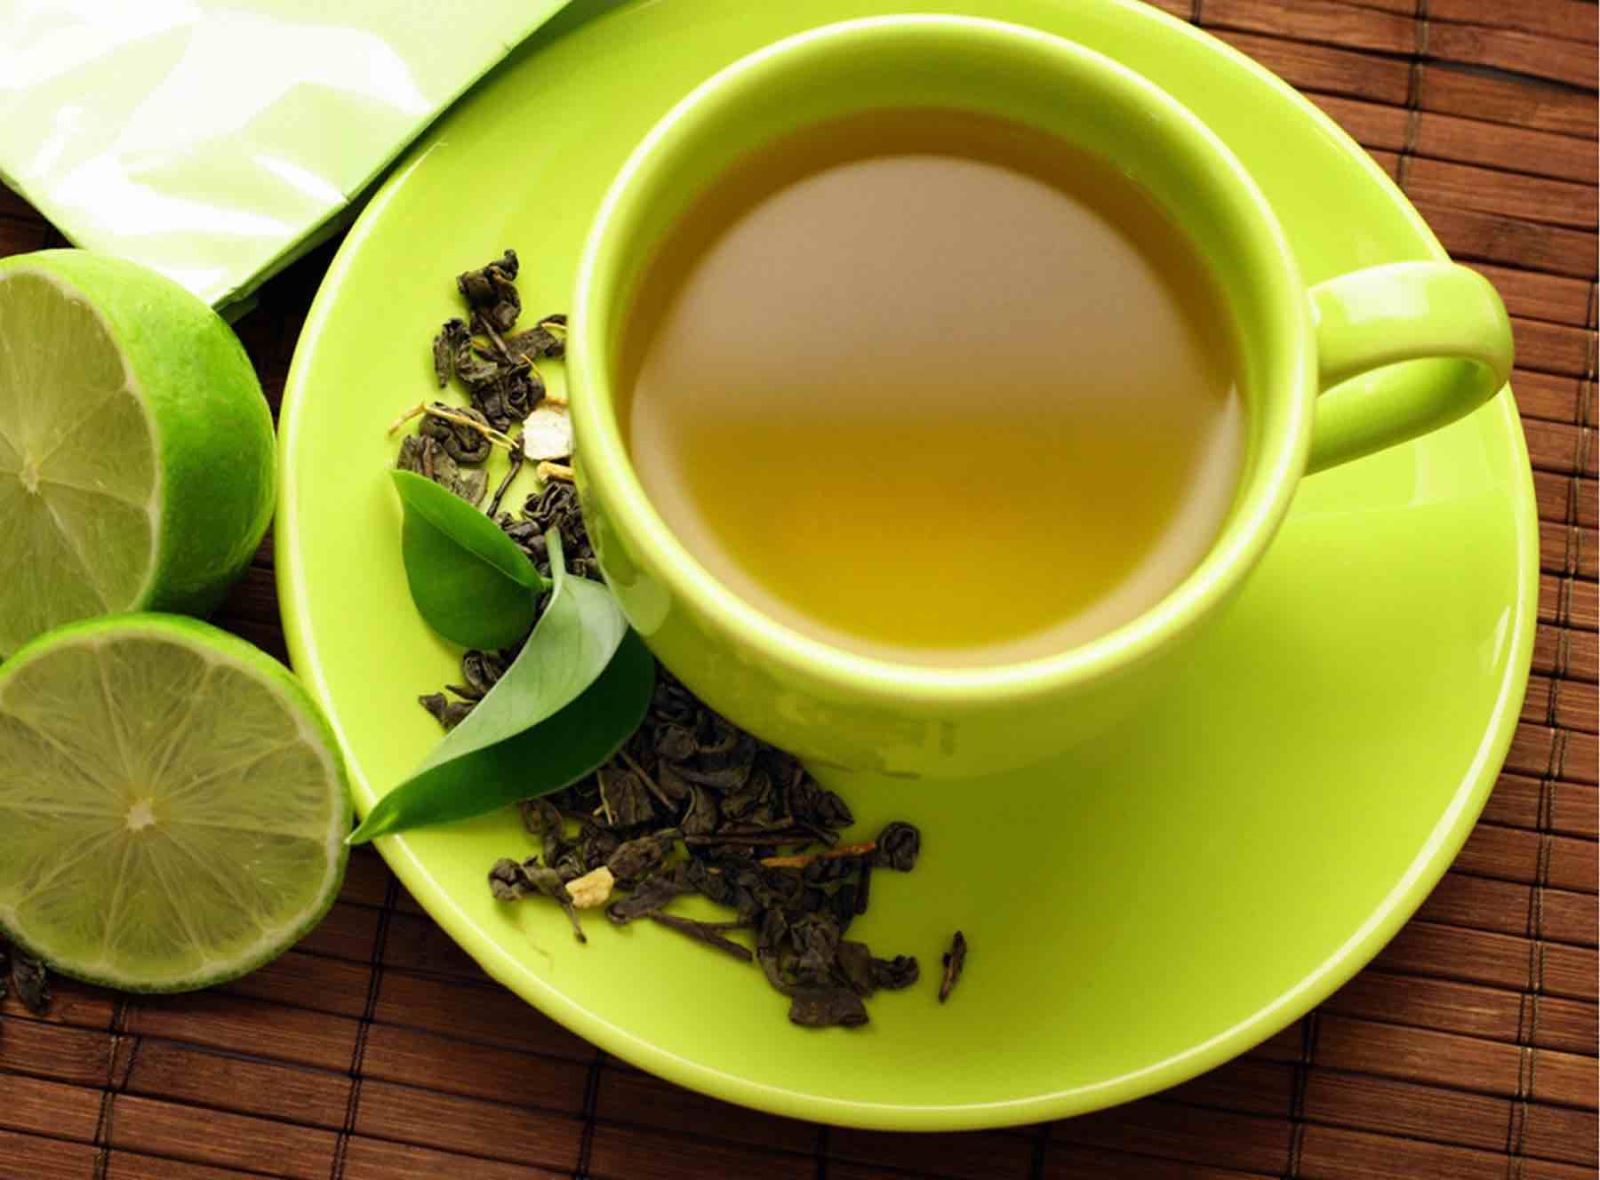 Seven Benefits Of Drinking Green Tea For Your Health